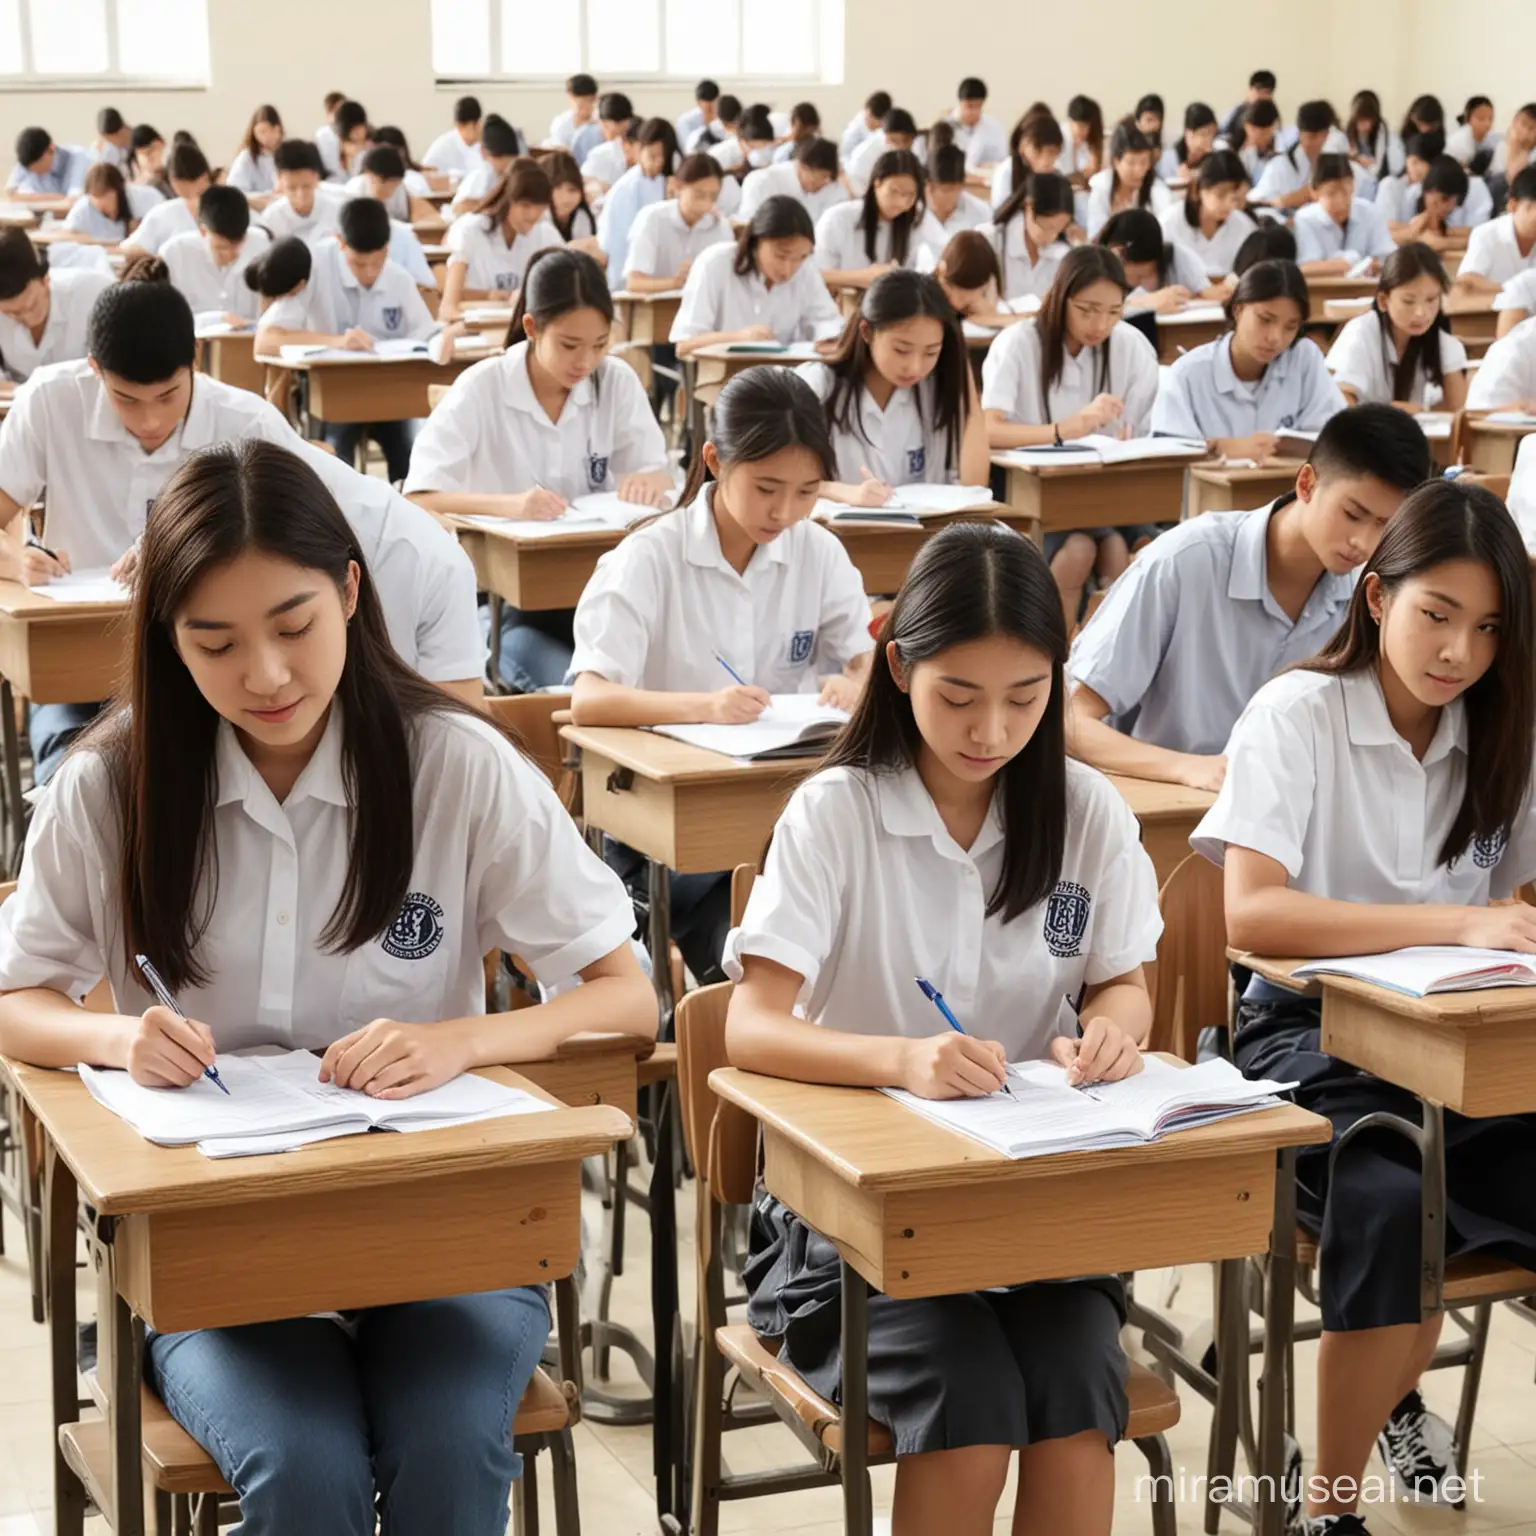 Students Preparing for College Entrance Exams